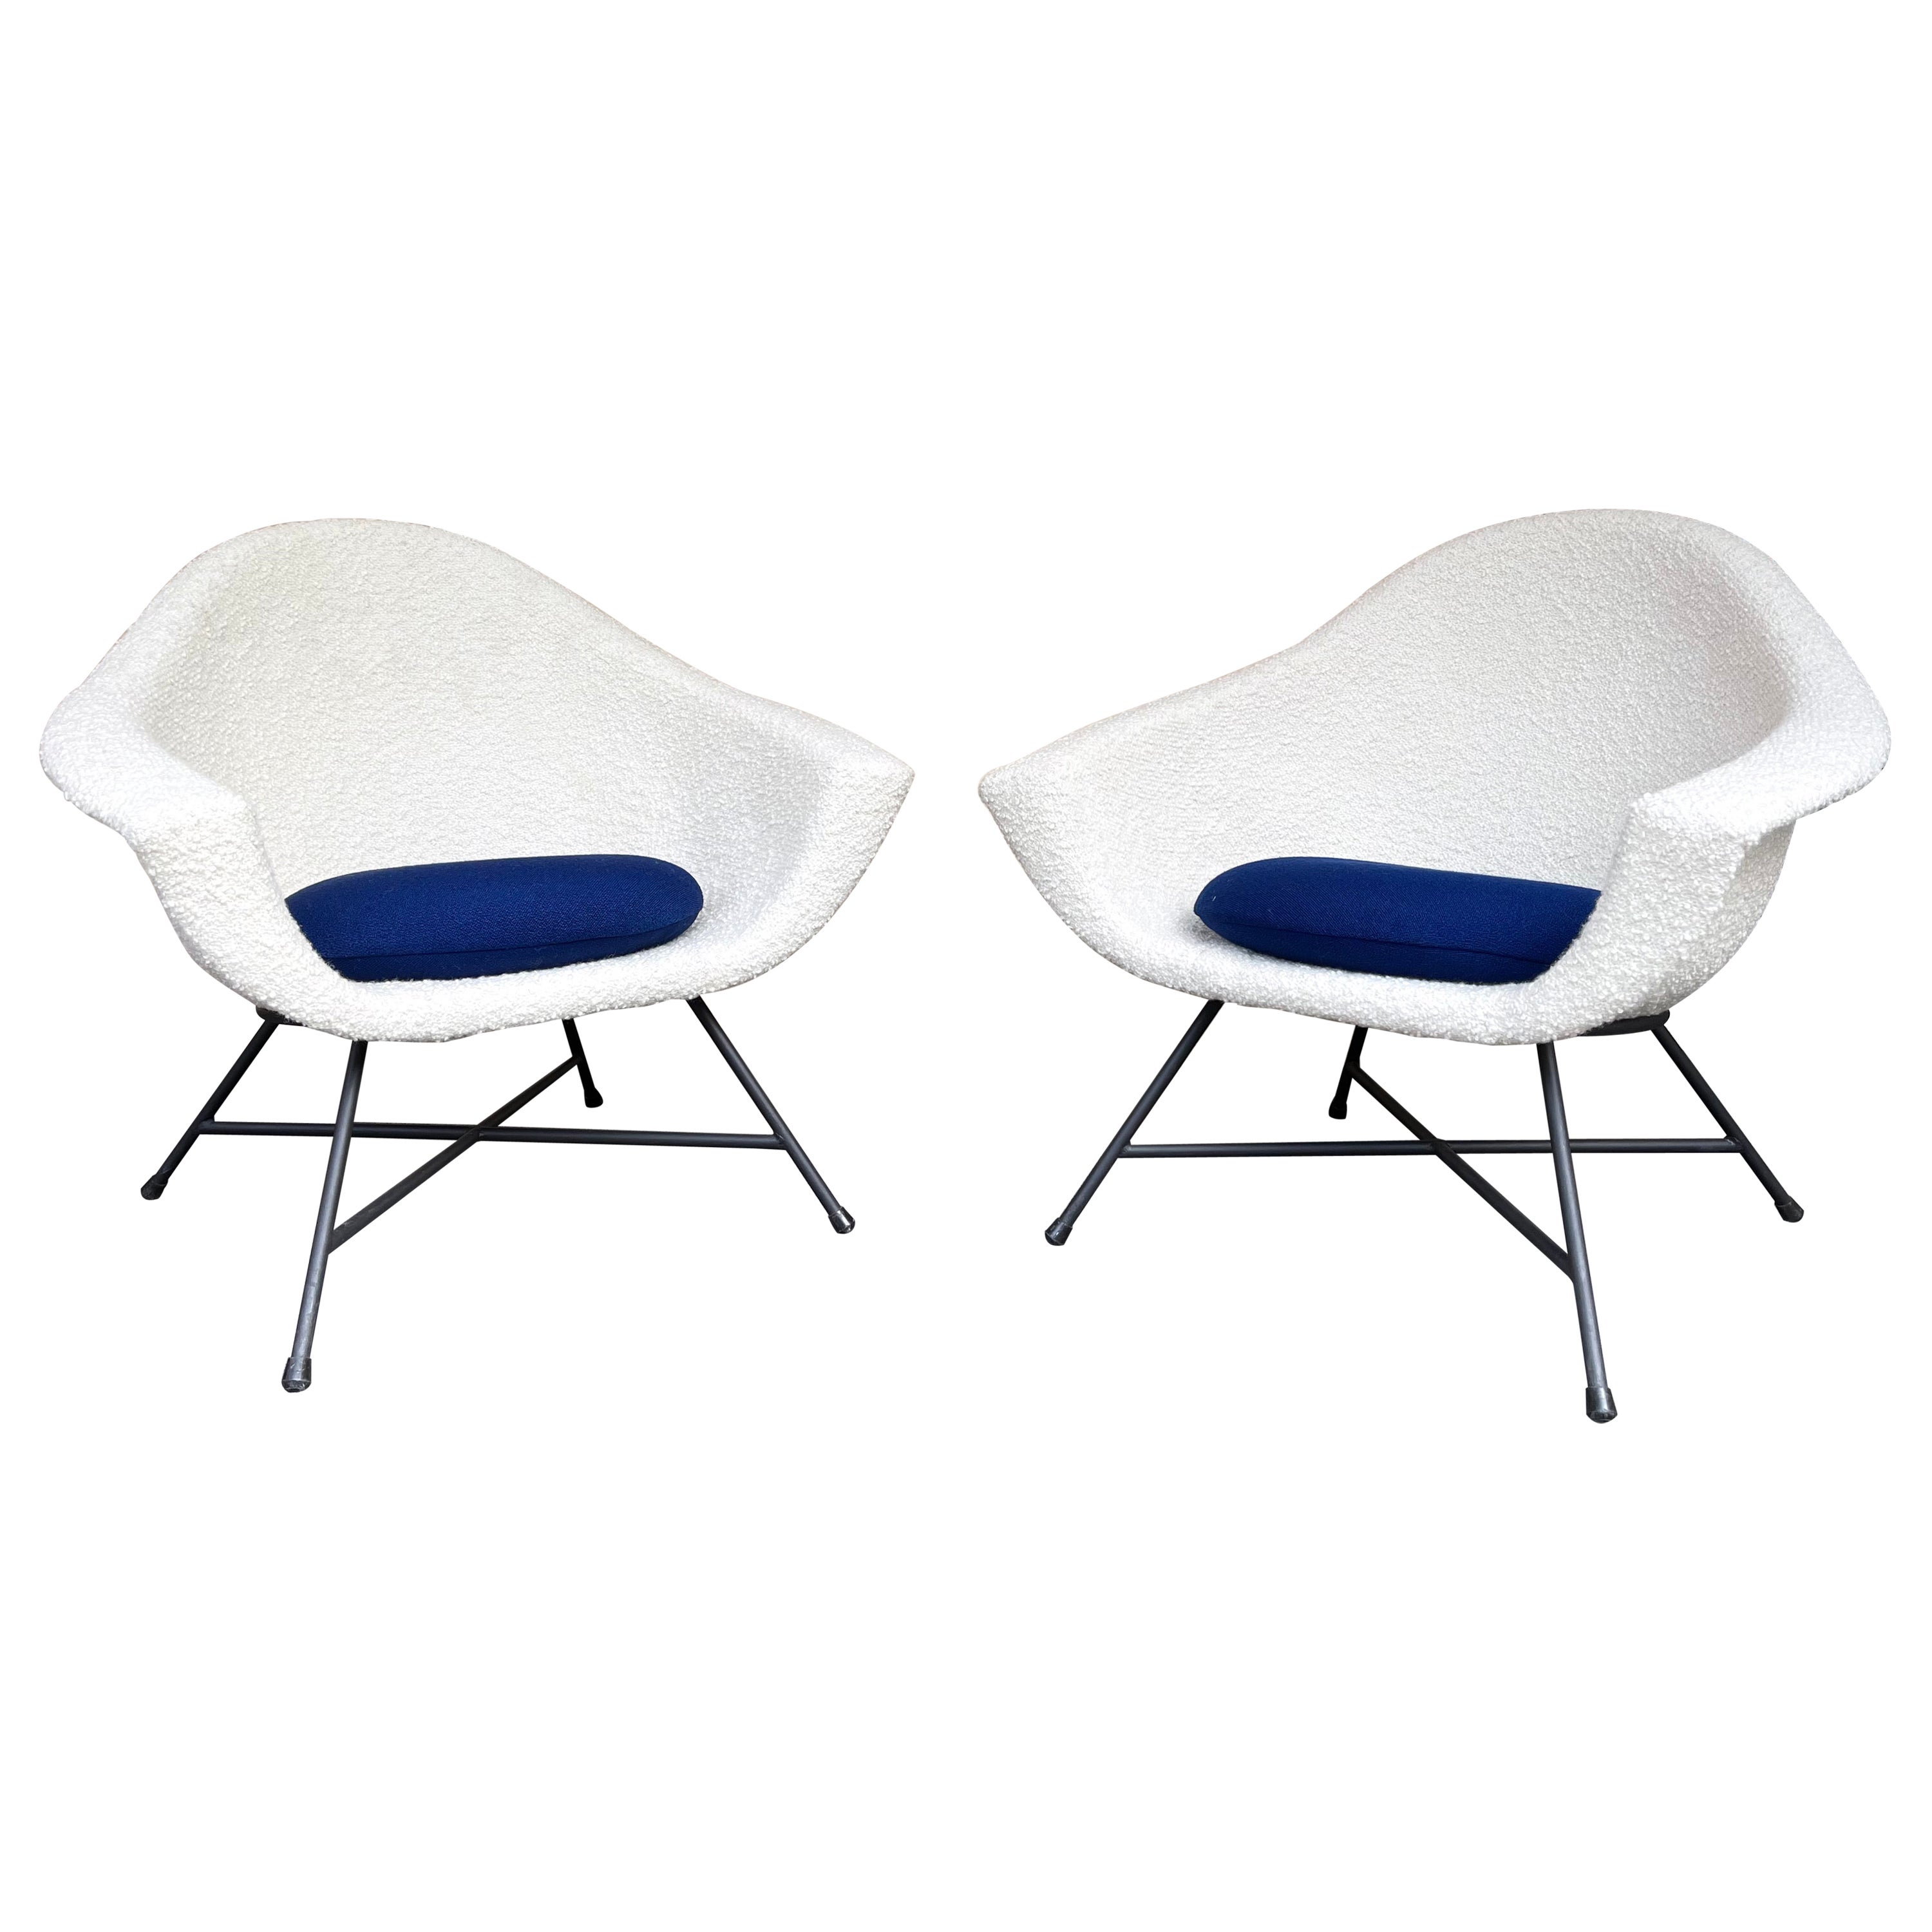 Pair of Armchairs 58 by Dangles & Defrance for Burov. France, 1950s